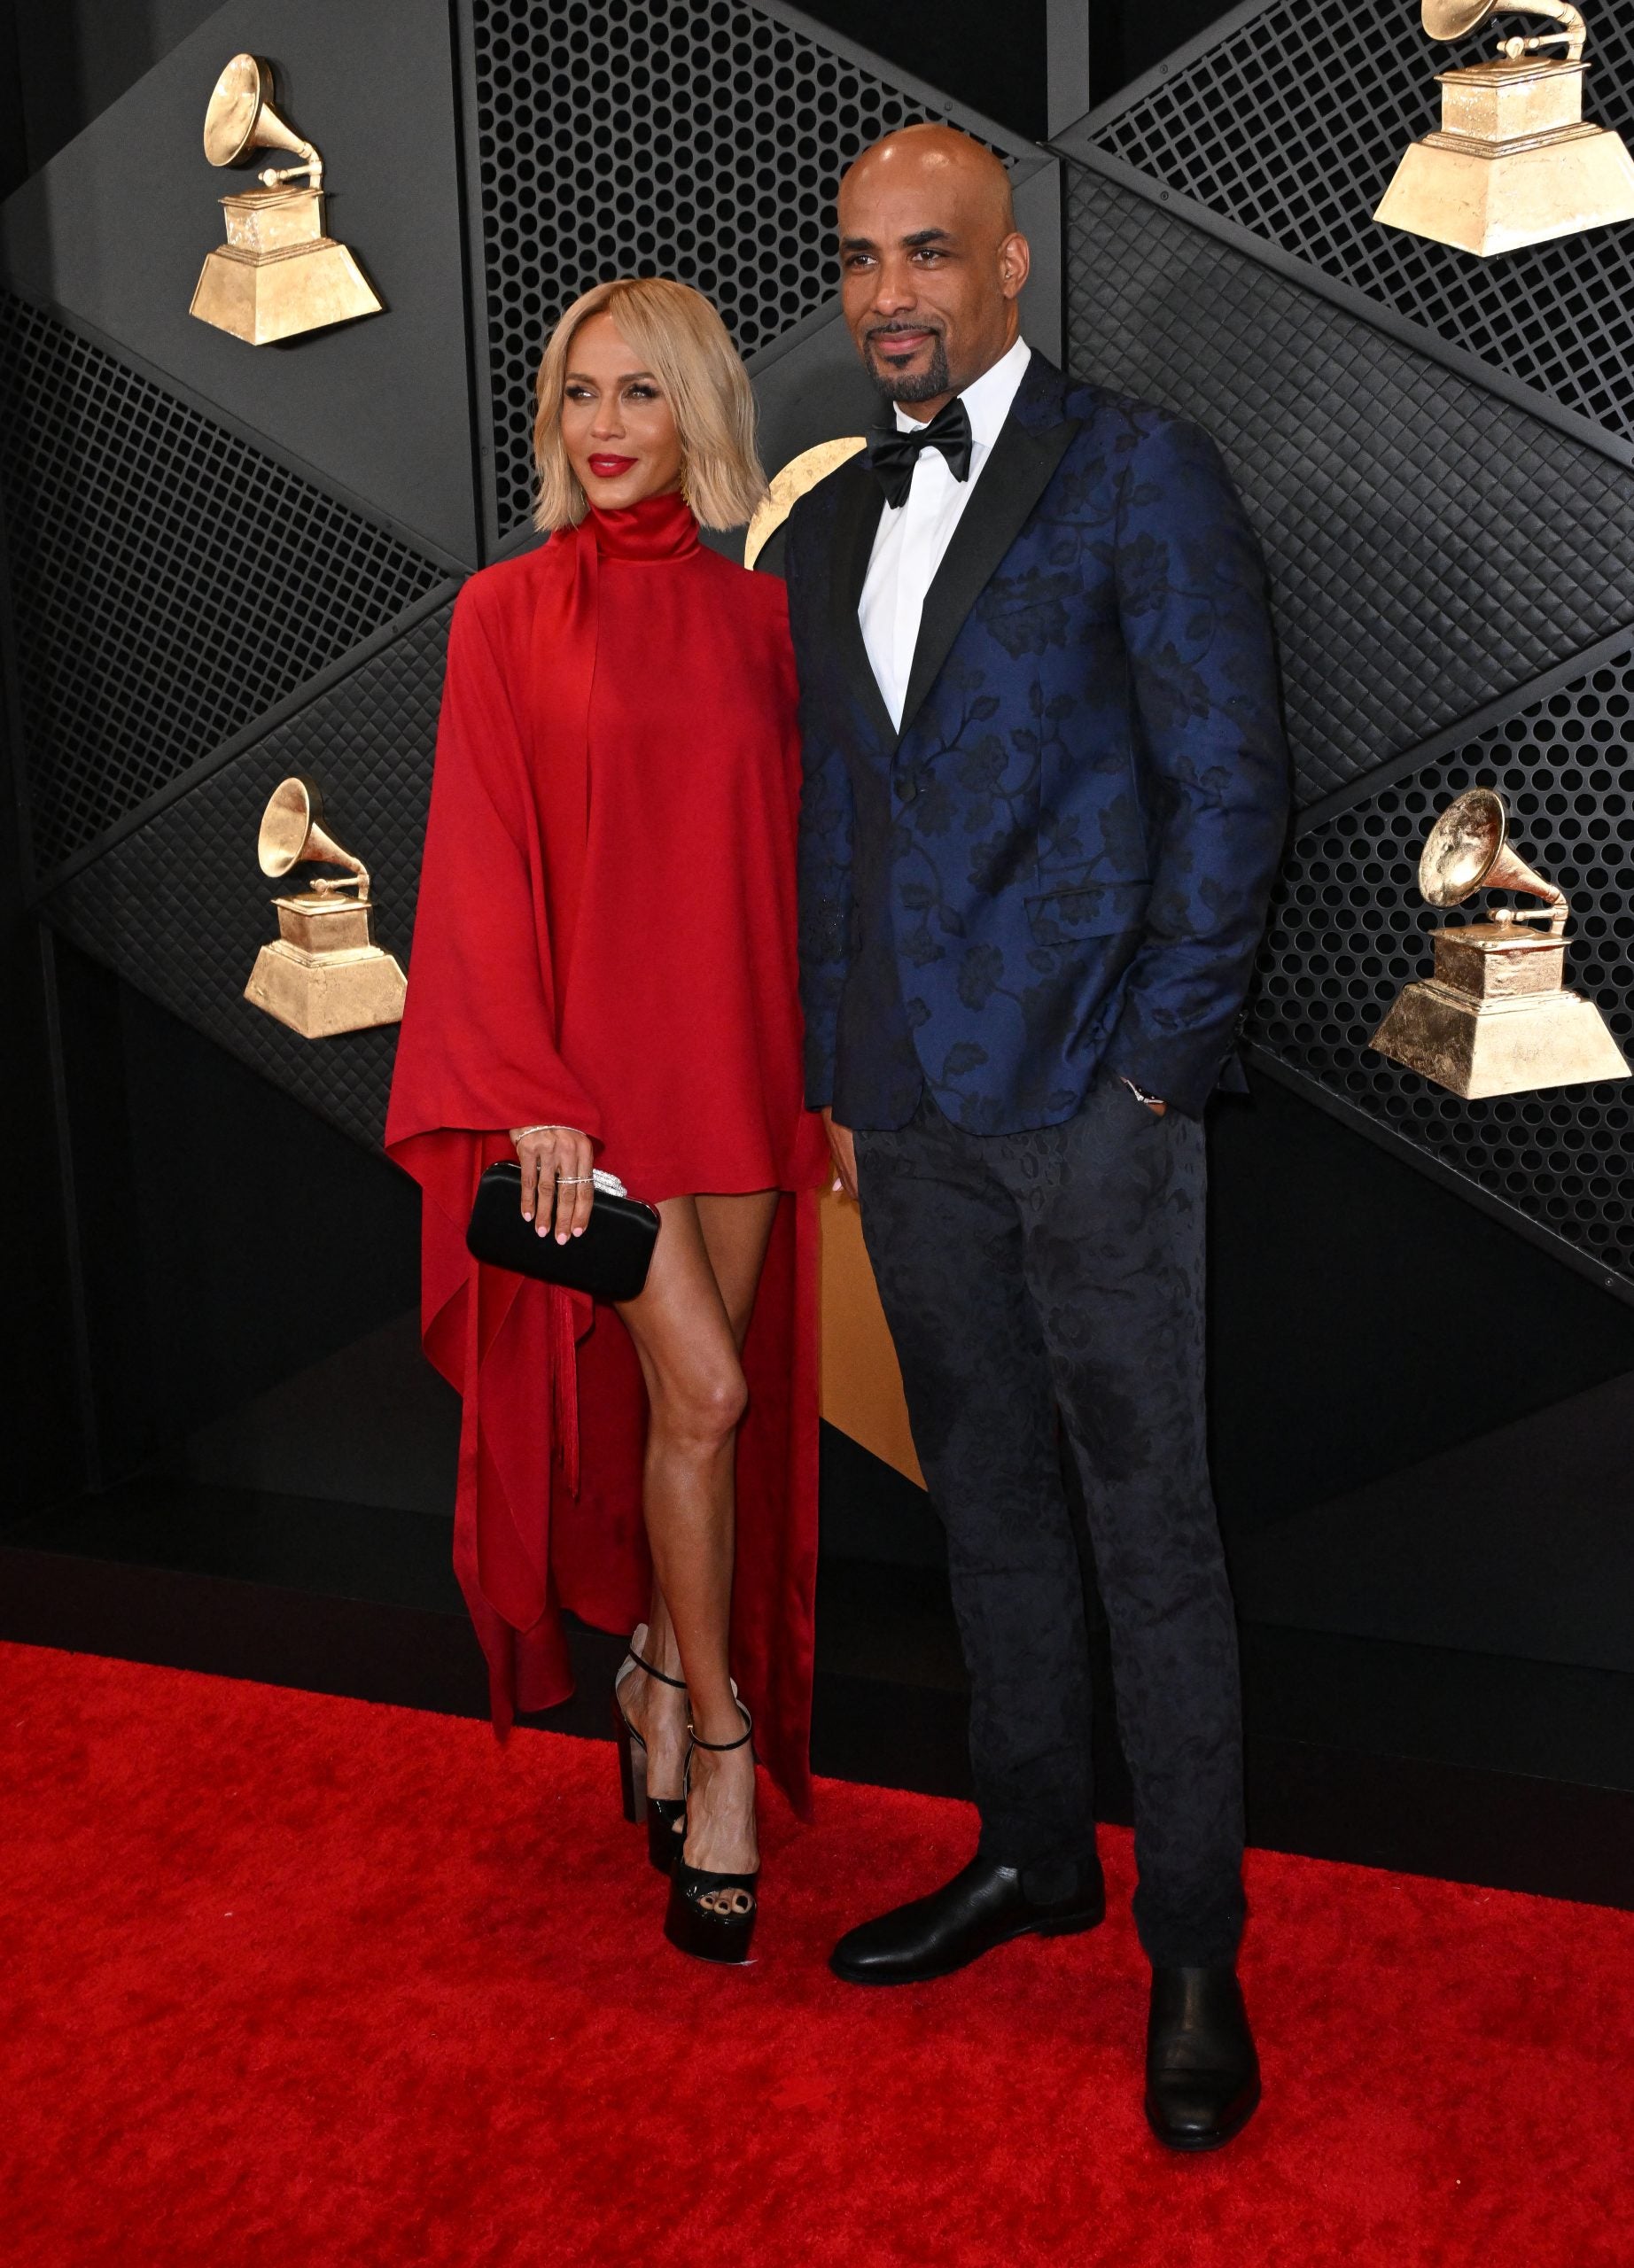 Black Love Always Wins: The Hottest Celebrity Couples At The 66th Annual Grammy Awards